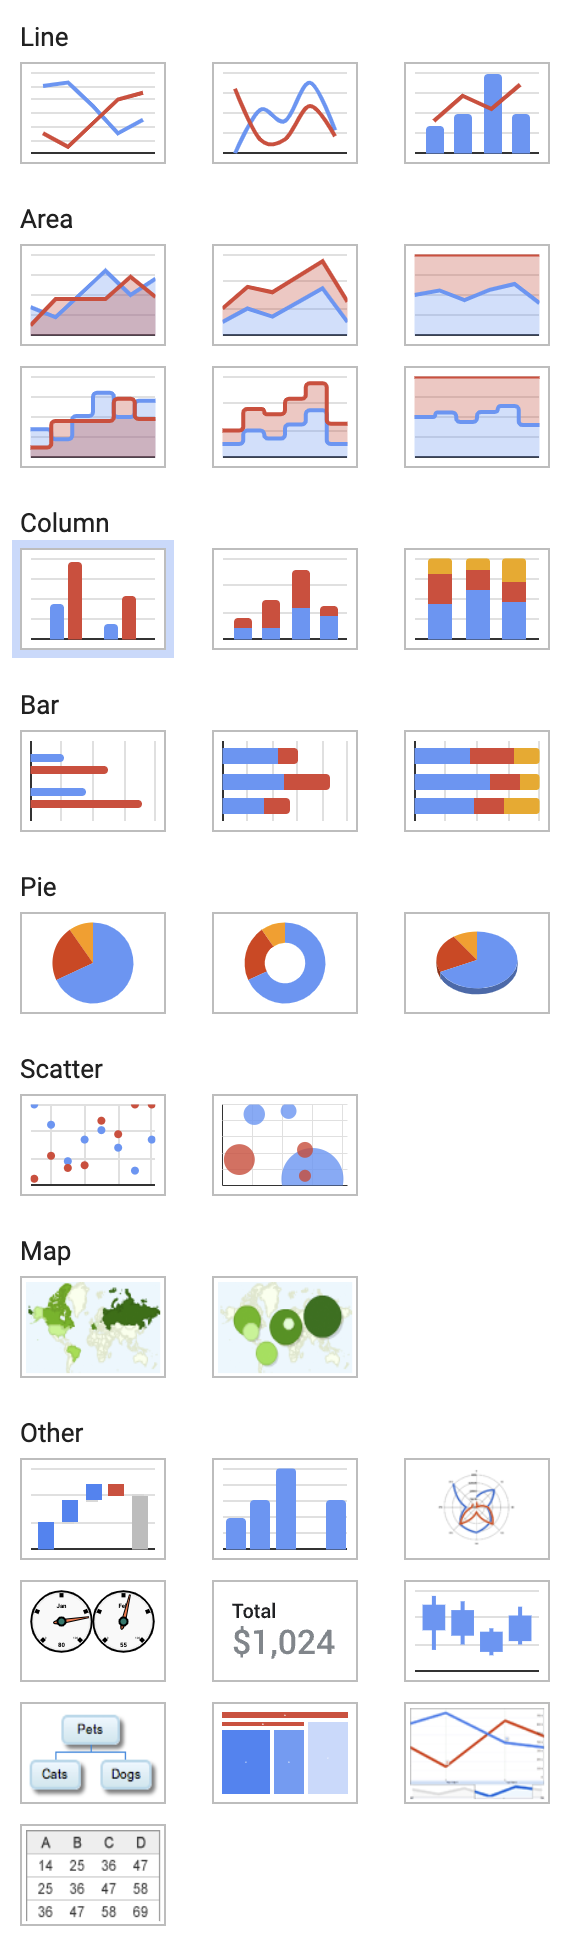 The available chart types in Google Sheets. The chart icons are grouped into the categories Line, Area, Column, Bar, Pie, Scatter, Map and Other